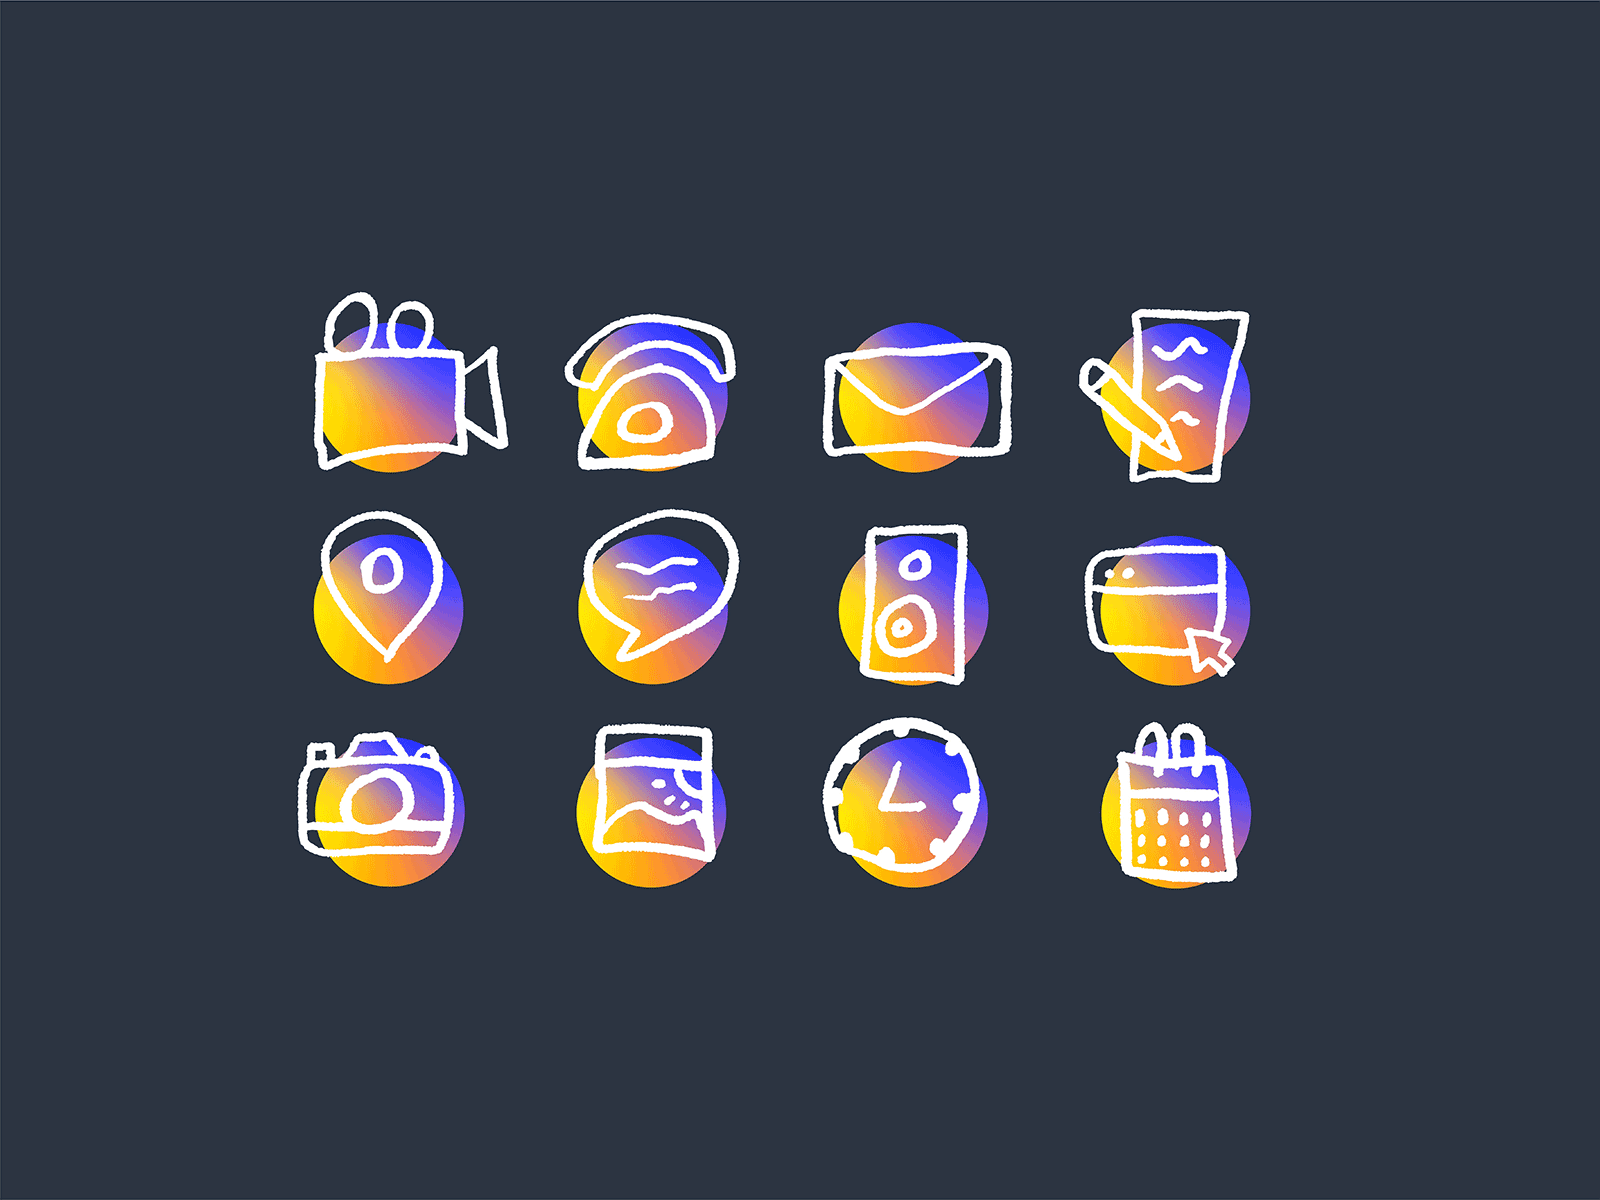 Day 005 - App Icon Set - Illustrative and Vector